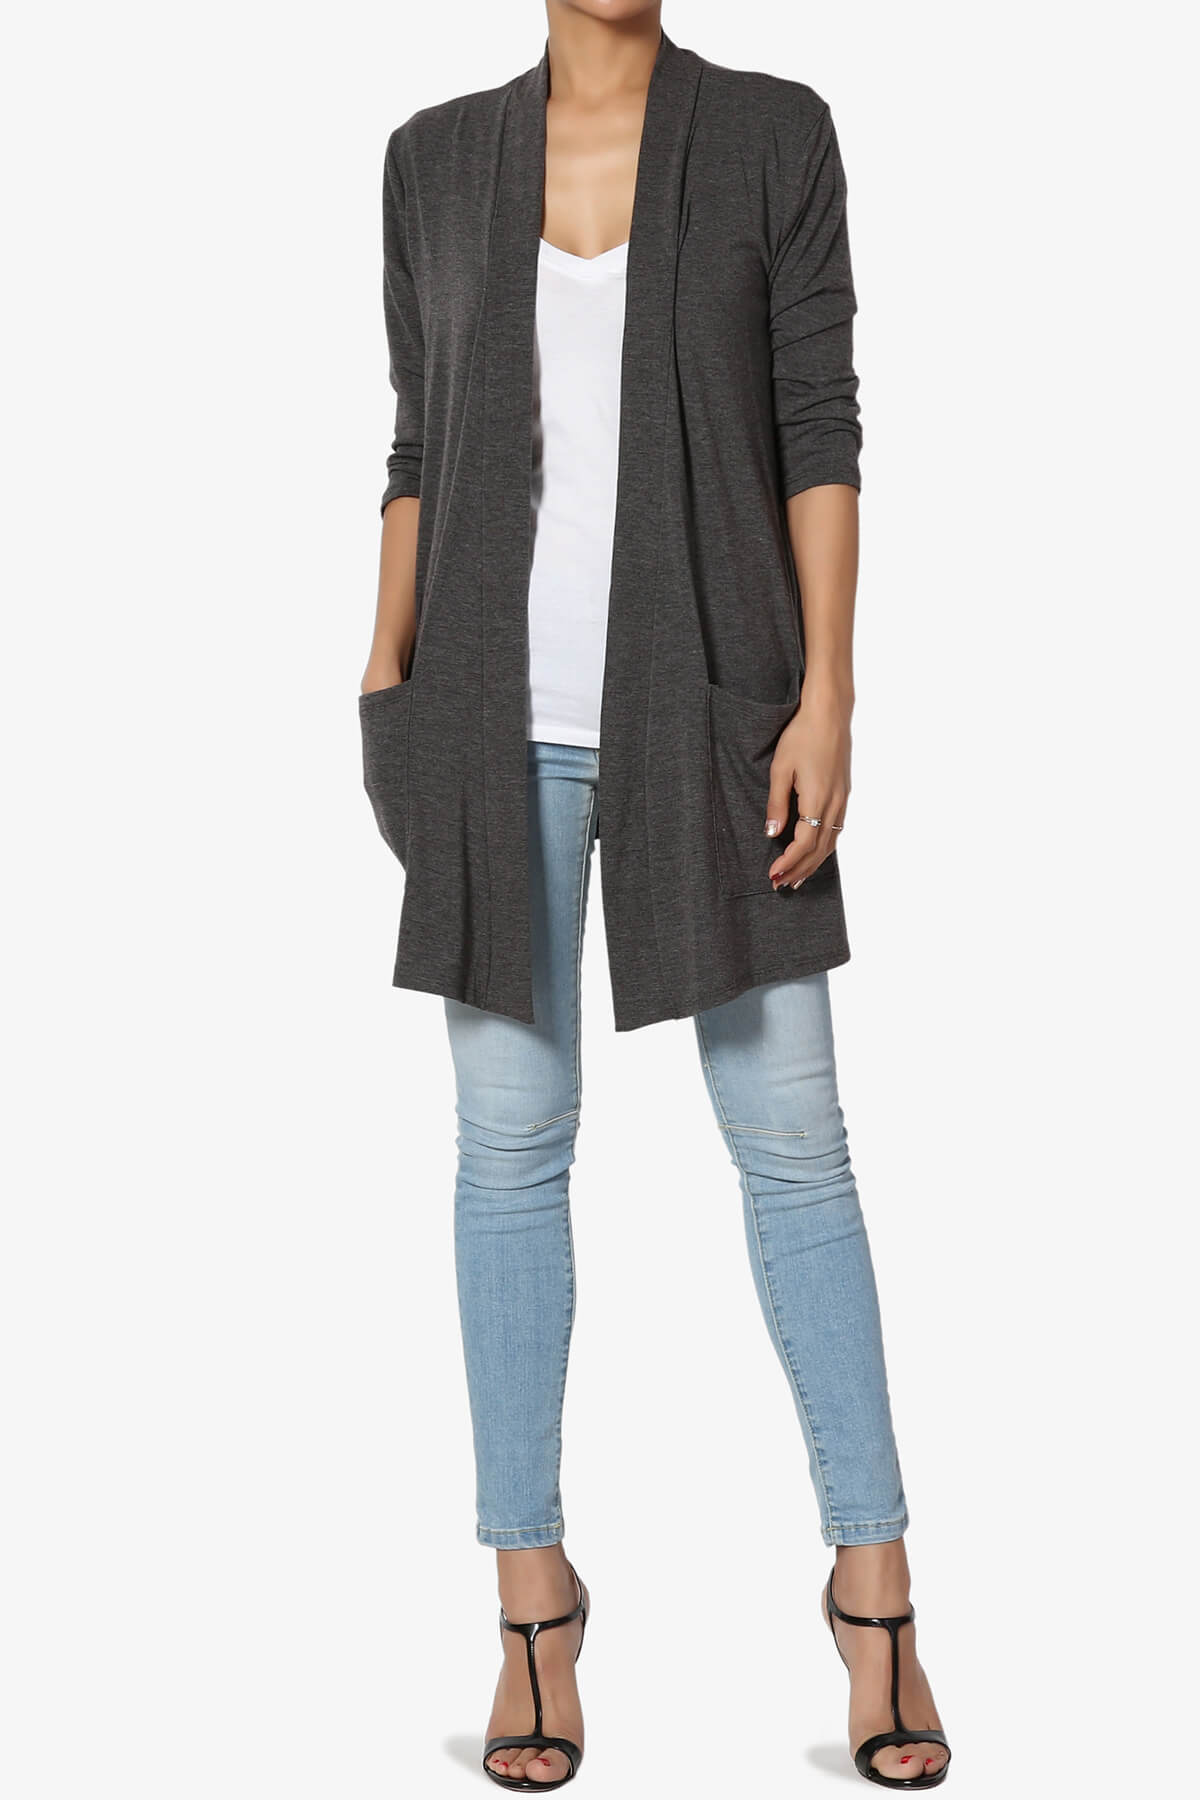 Load image into Gallery viewer, Daday Slouchy Pocket 3/4 Sleeve Cardigan CHARCOAL_6
